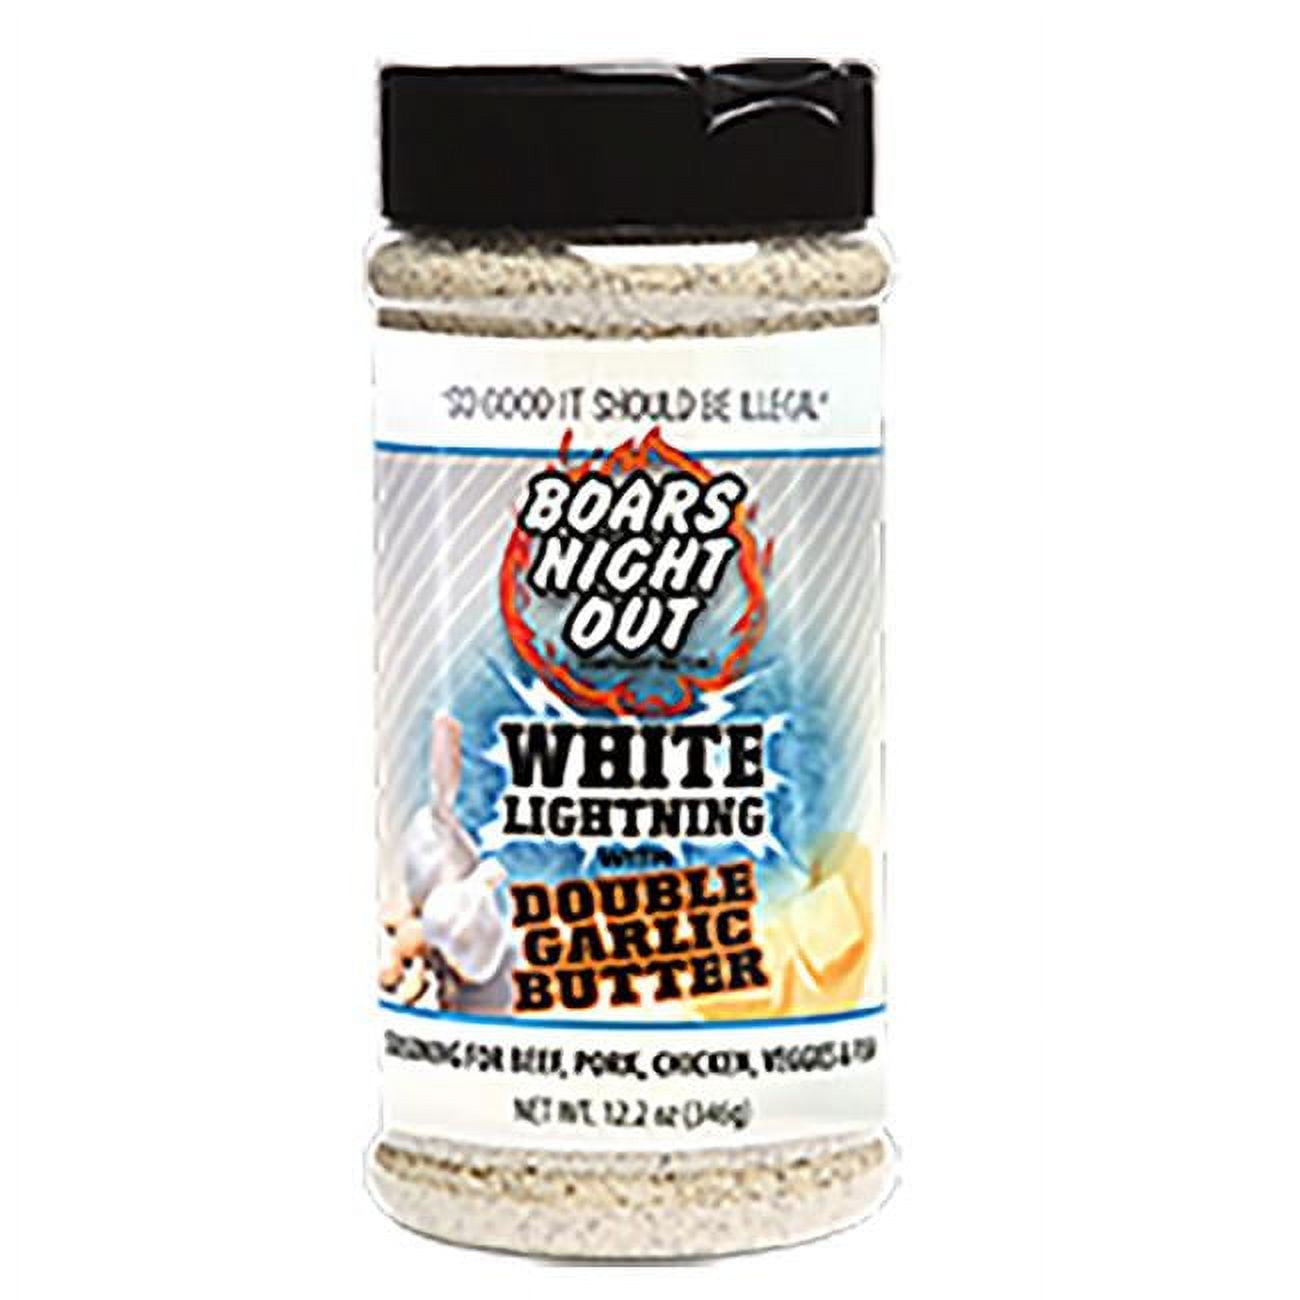 Picture of Boars Night Out 8024843 12.2 oz White Lightning Garlic Butter BBQ Seasoning